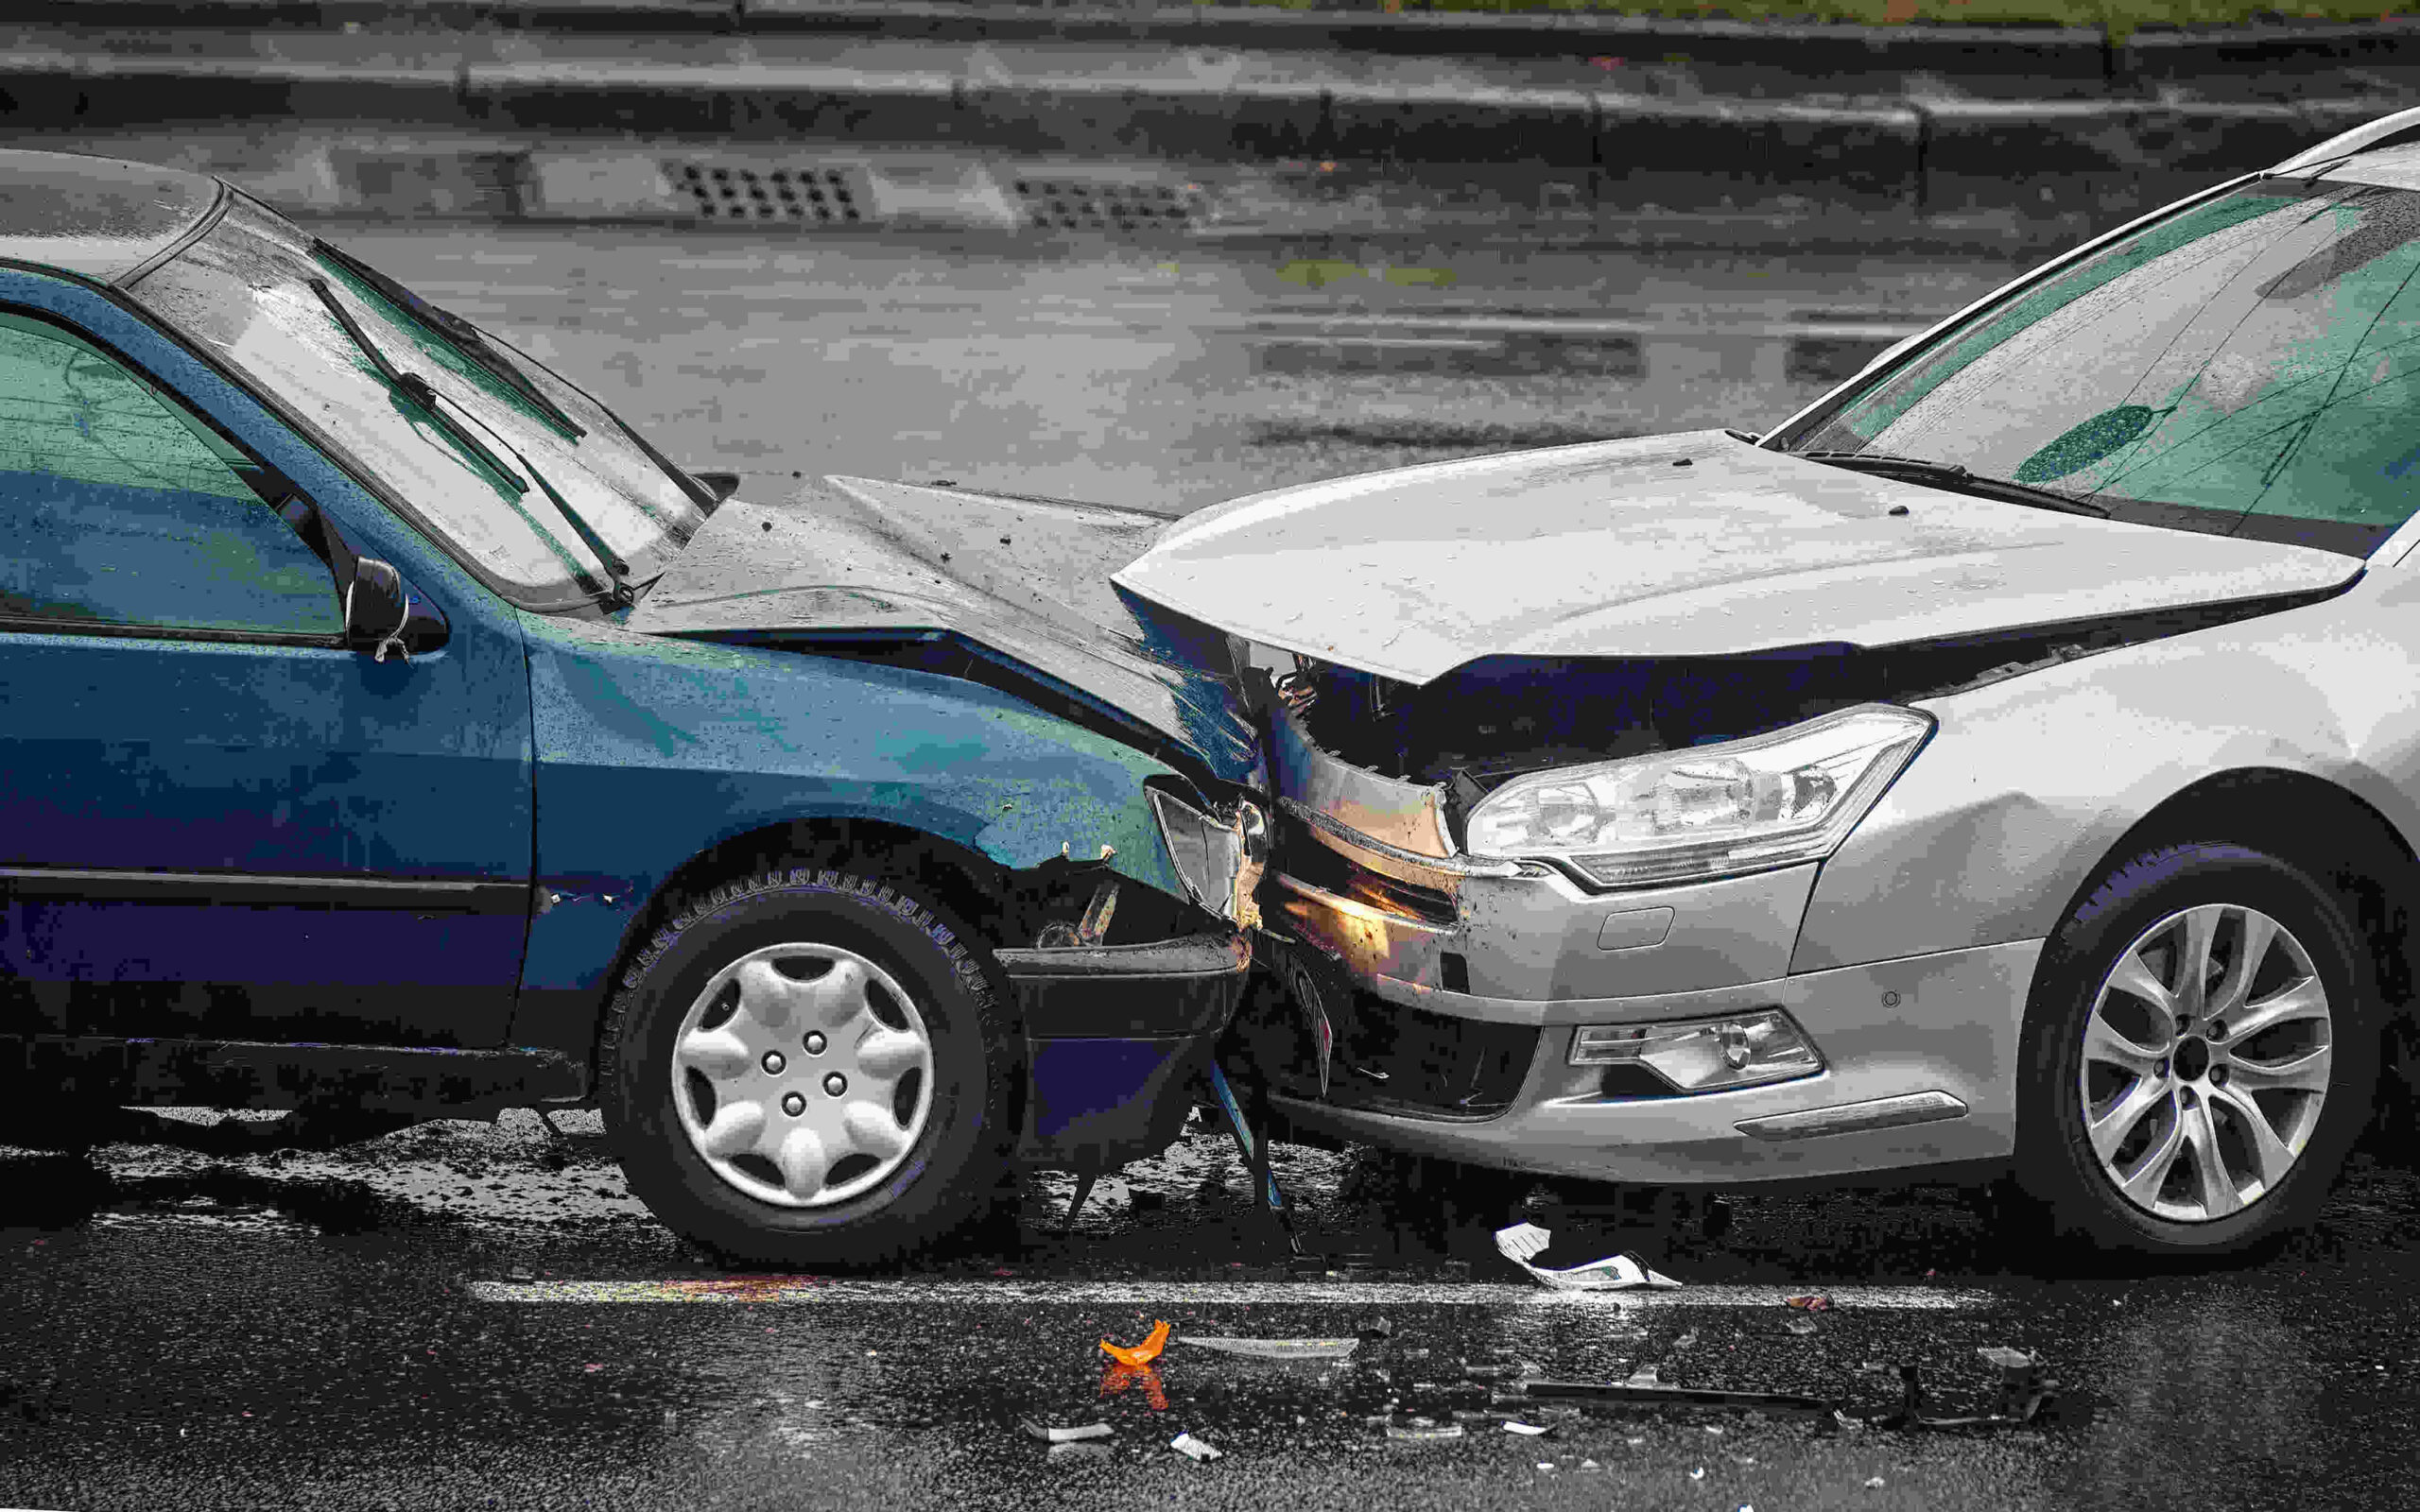 Image of head on collision between two cars.